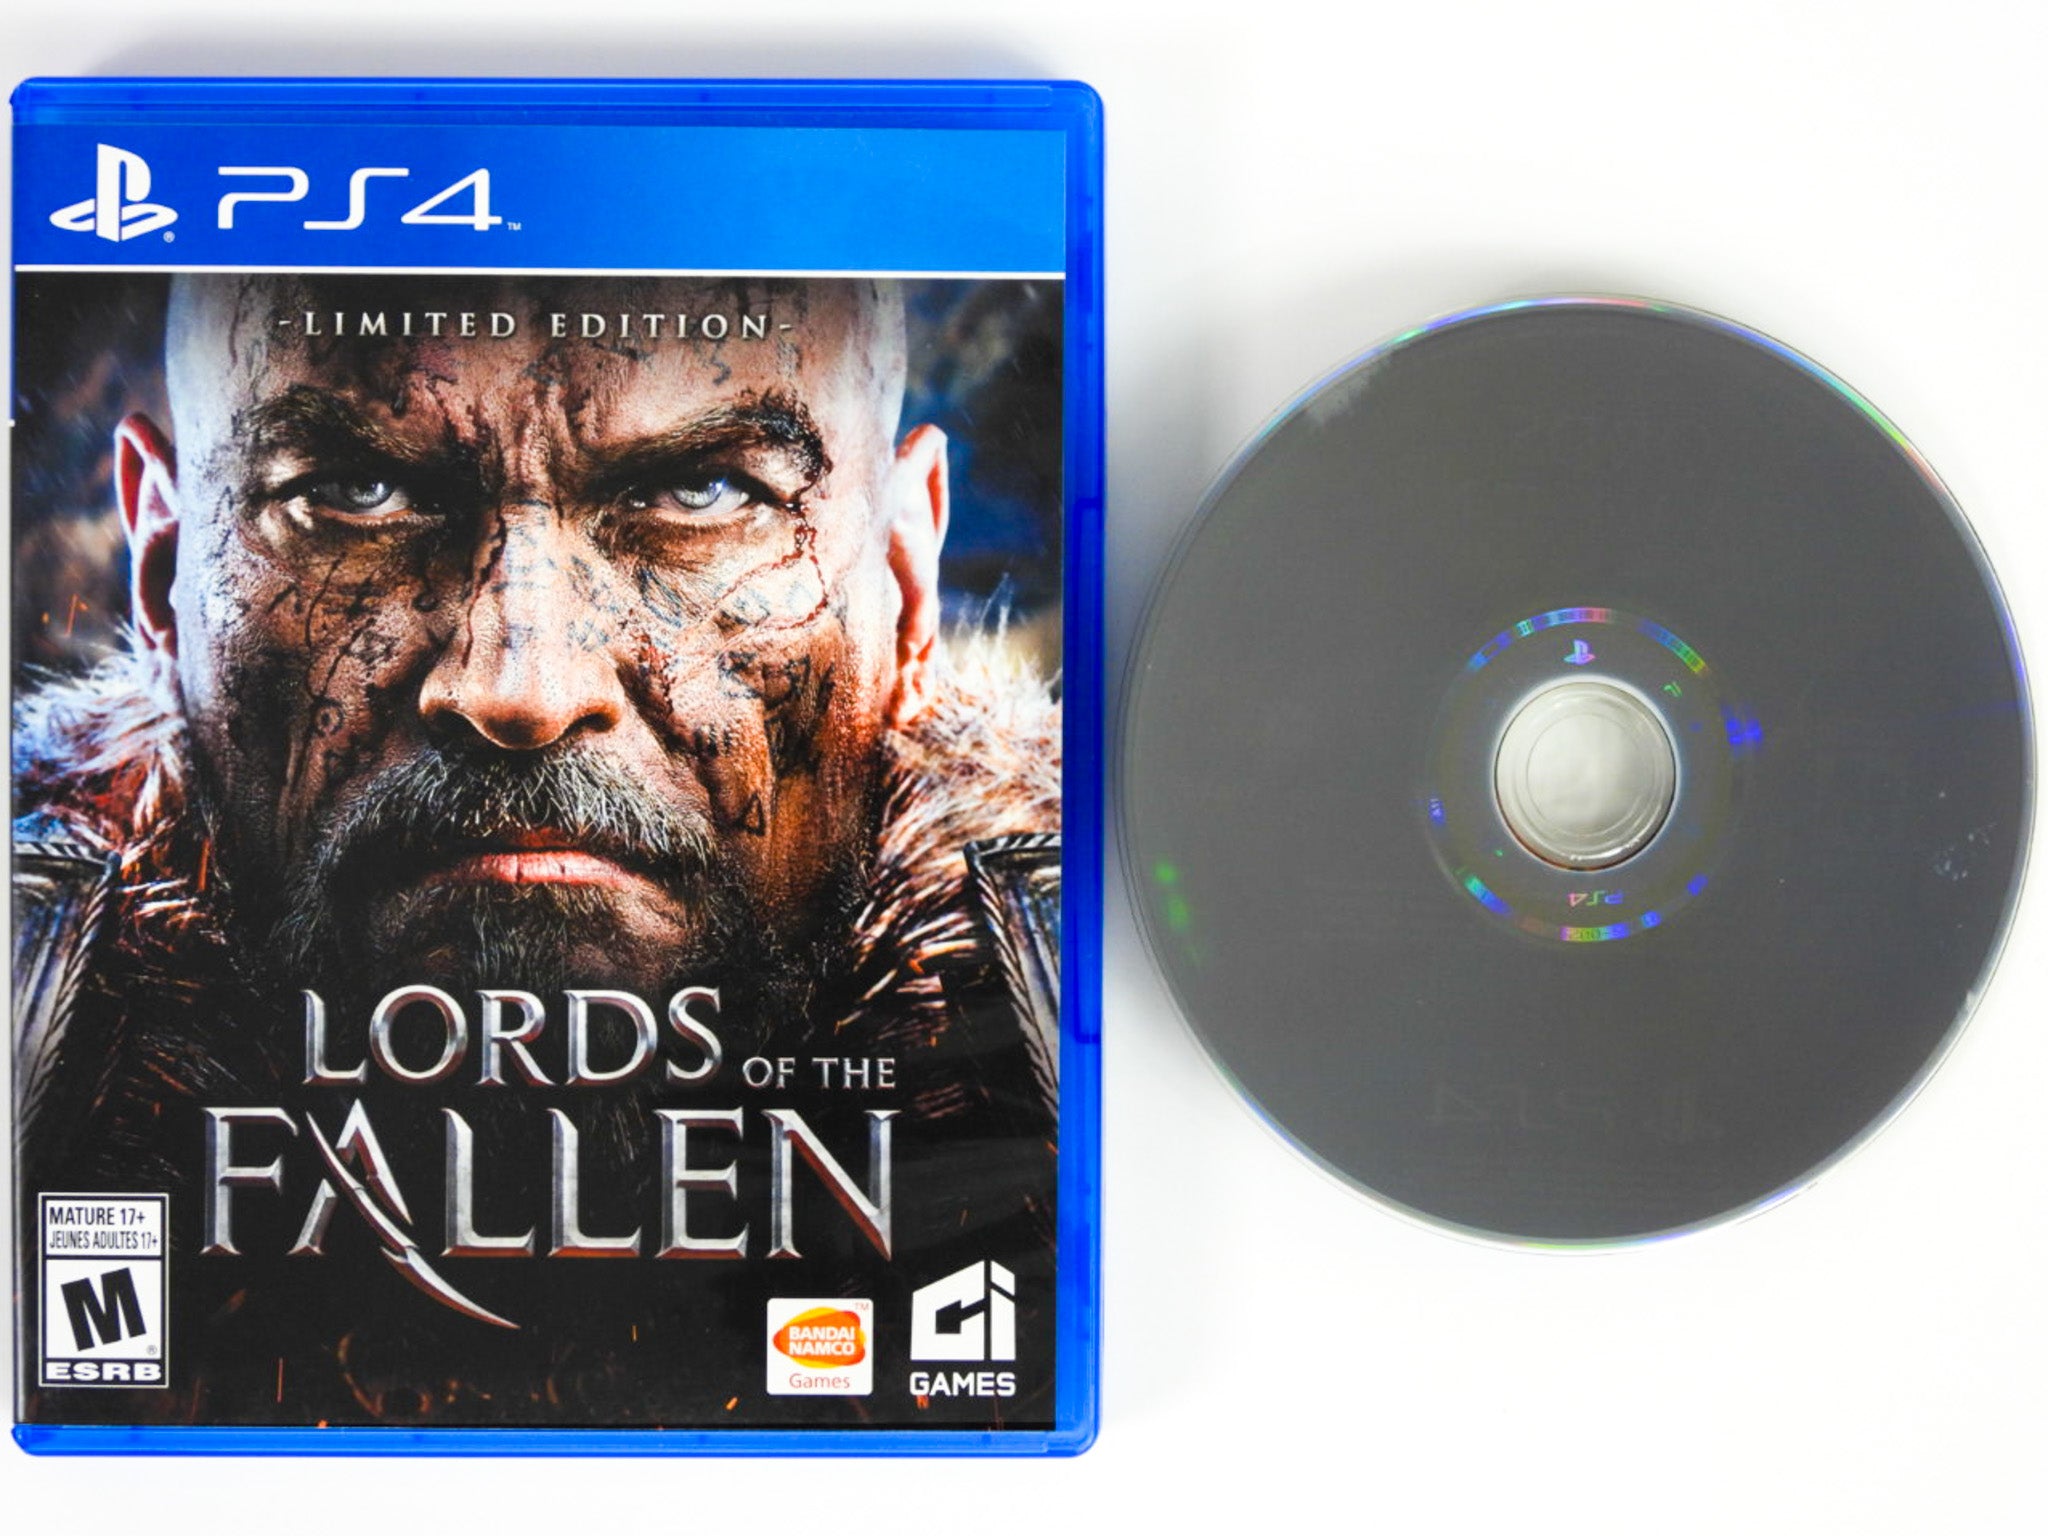 WOW!*** LORDS OF THE FALLEN - Complete Edition PS4 FACTORY SEALED!